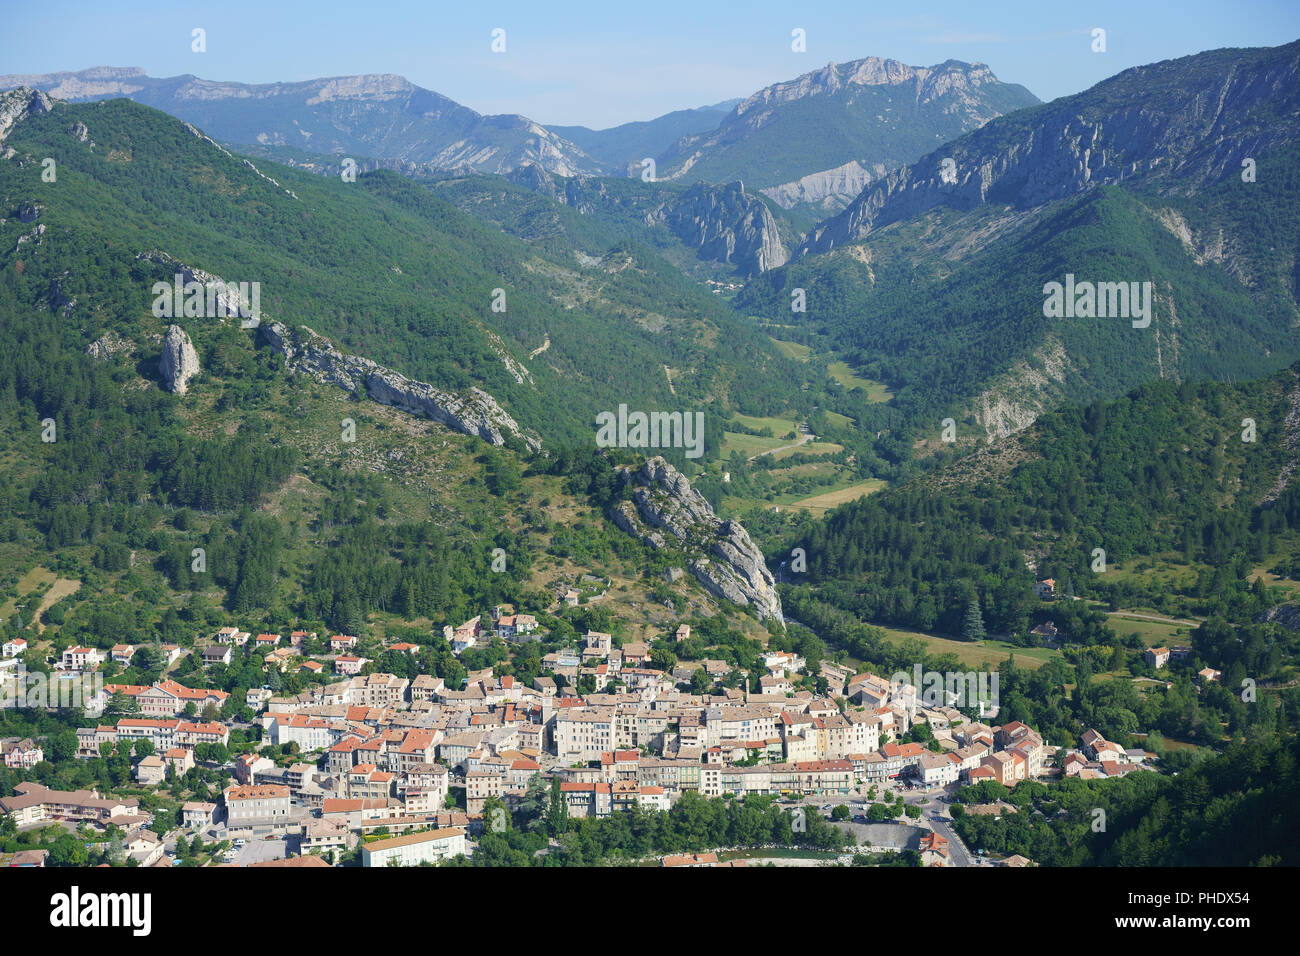 AERIAL VIEW. Picturesque medieval village in an unspoiled setting of forest and mountains in the Buëch Valley. Serres, Hautes-Alpes, Provence, France. Stock Photo